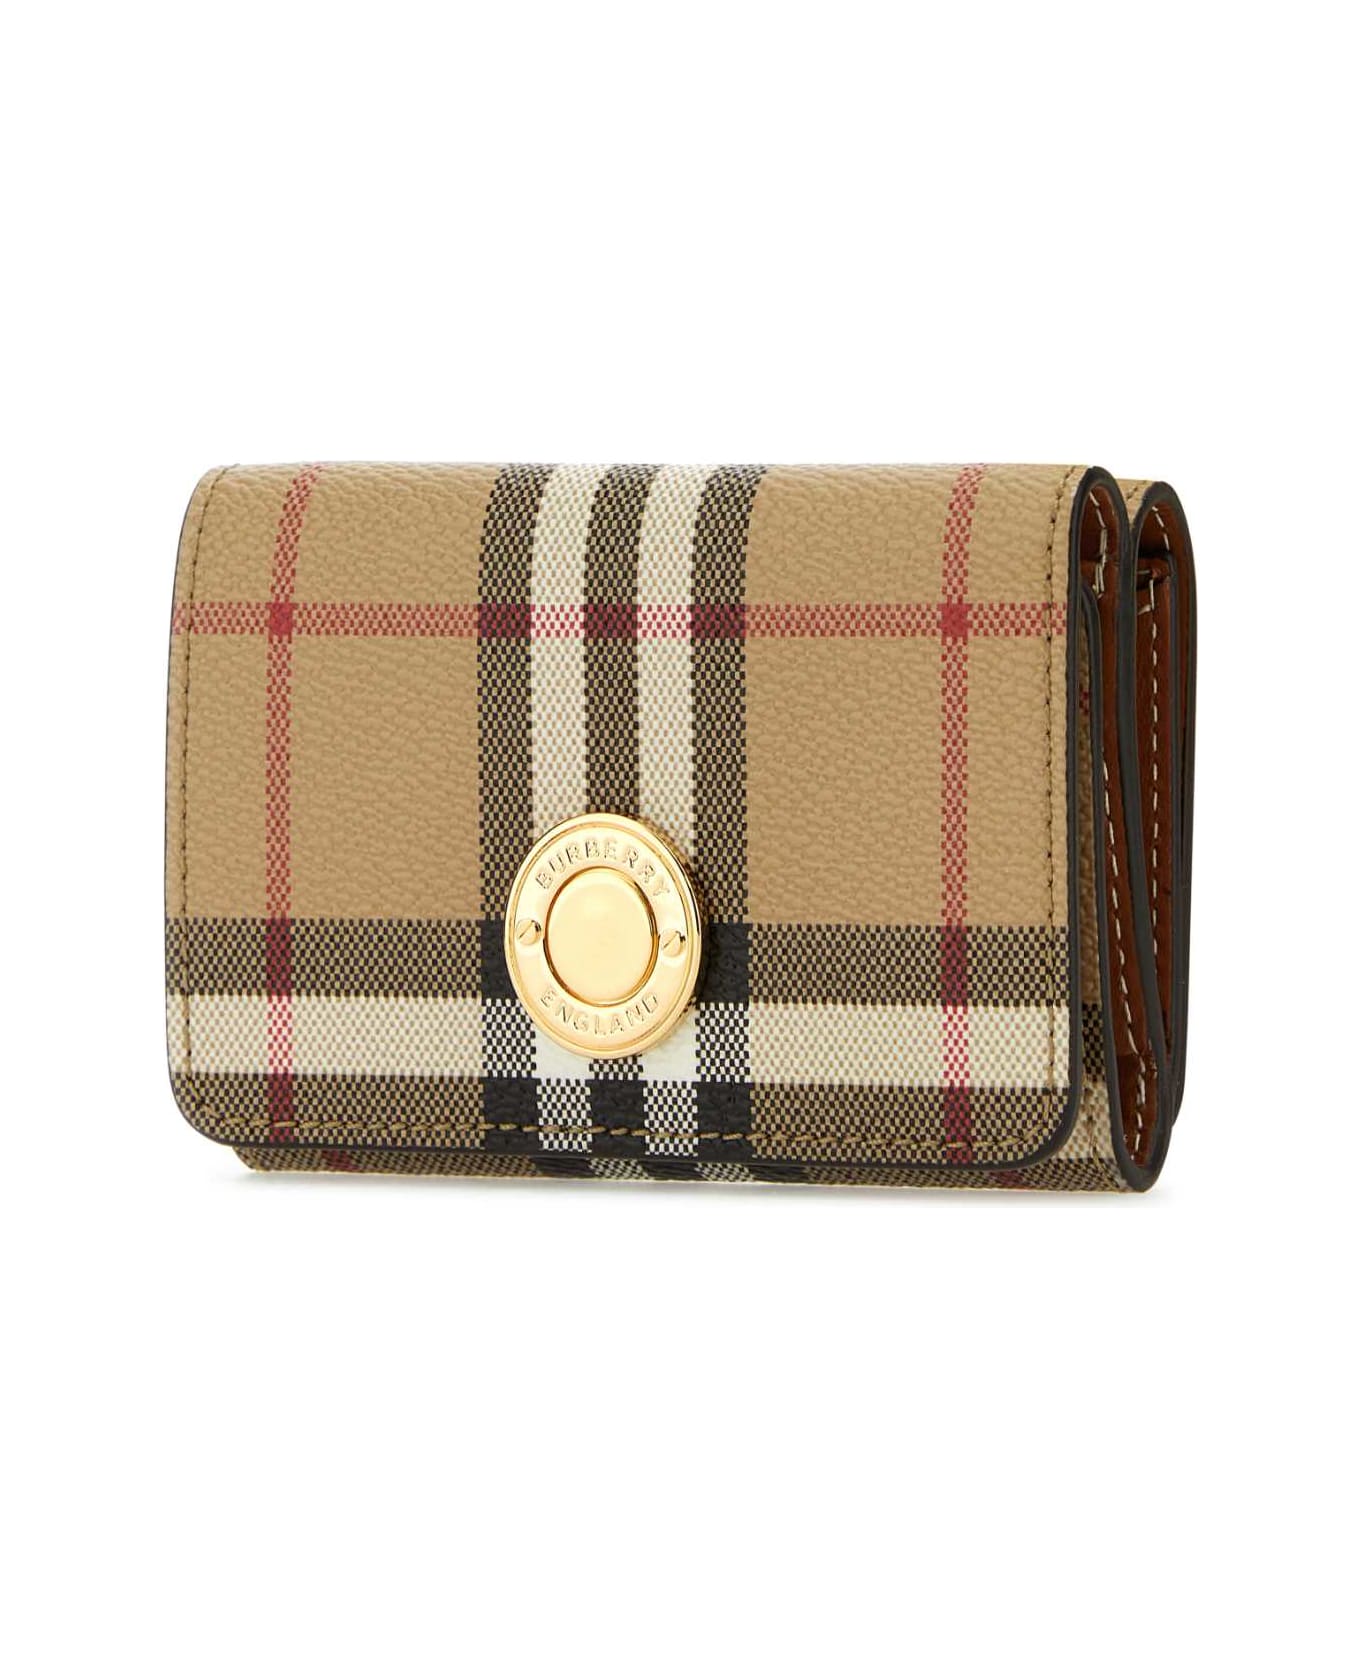 Burberry Printed Canvas Wallet - ARCHIVEBEIGE